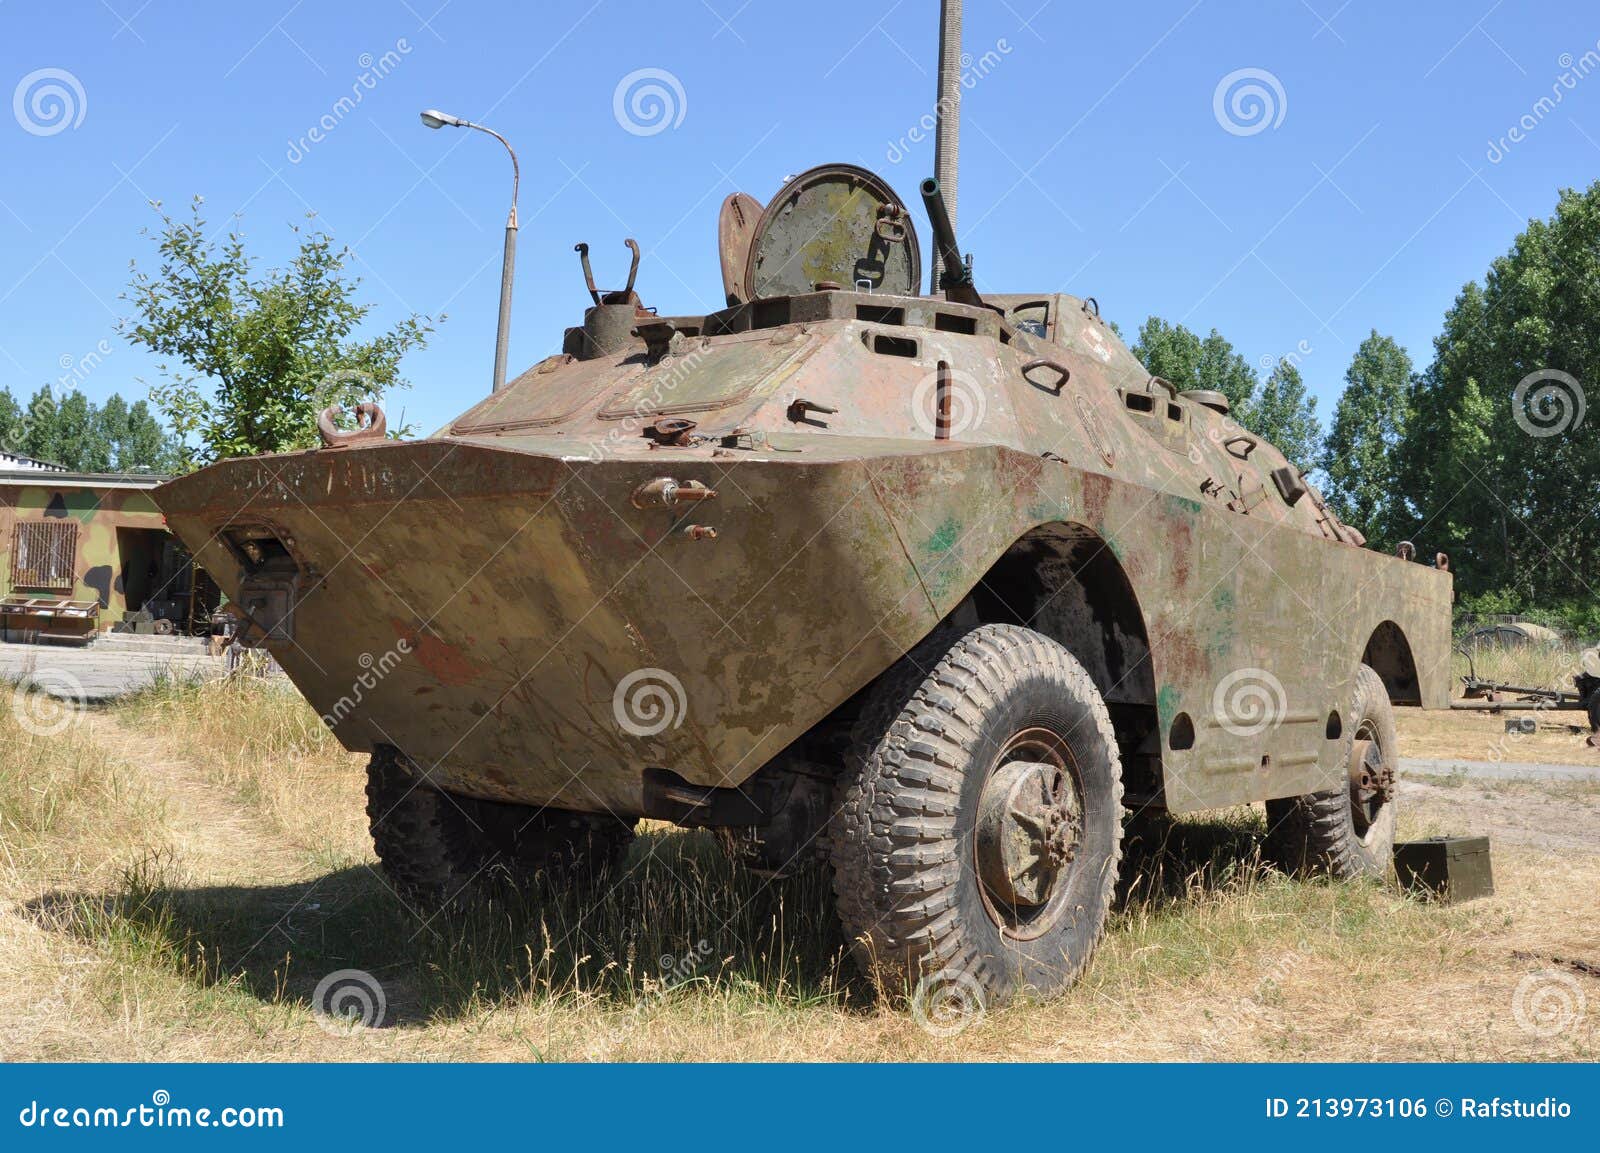 Soviet Amphibious Vehicle From The Cold War Stock Photography ...